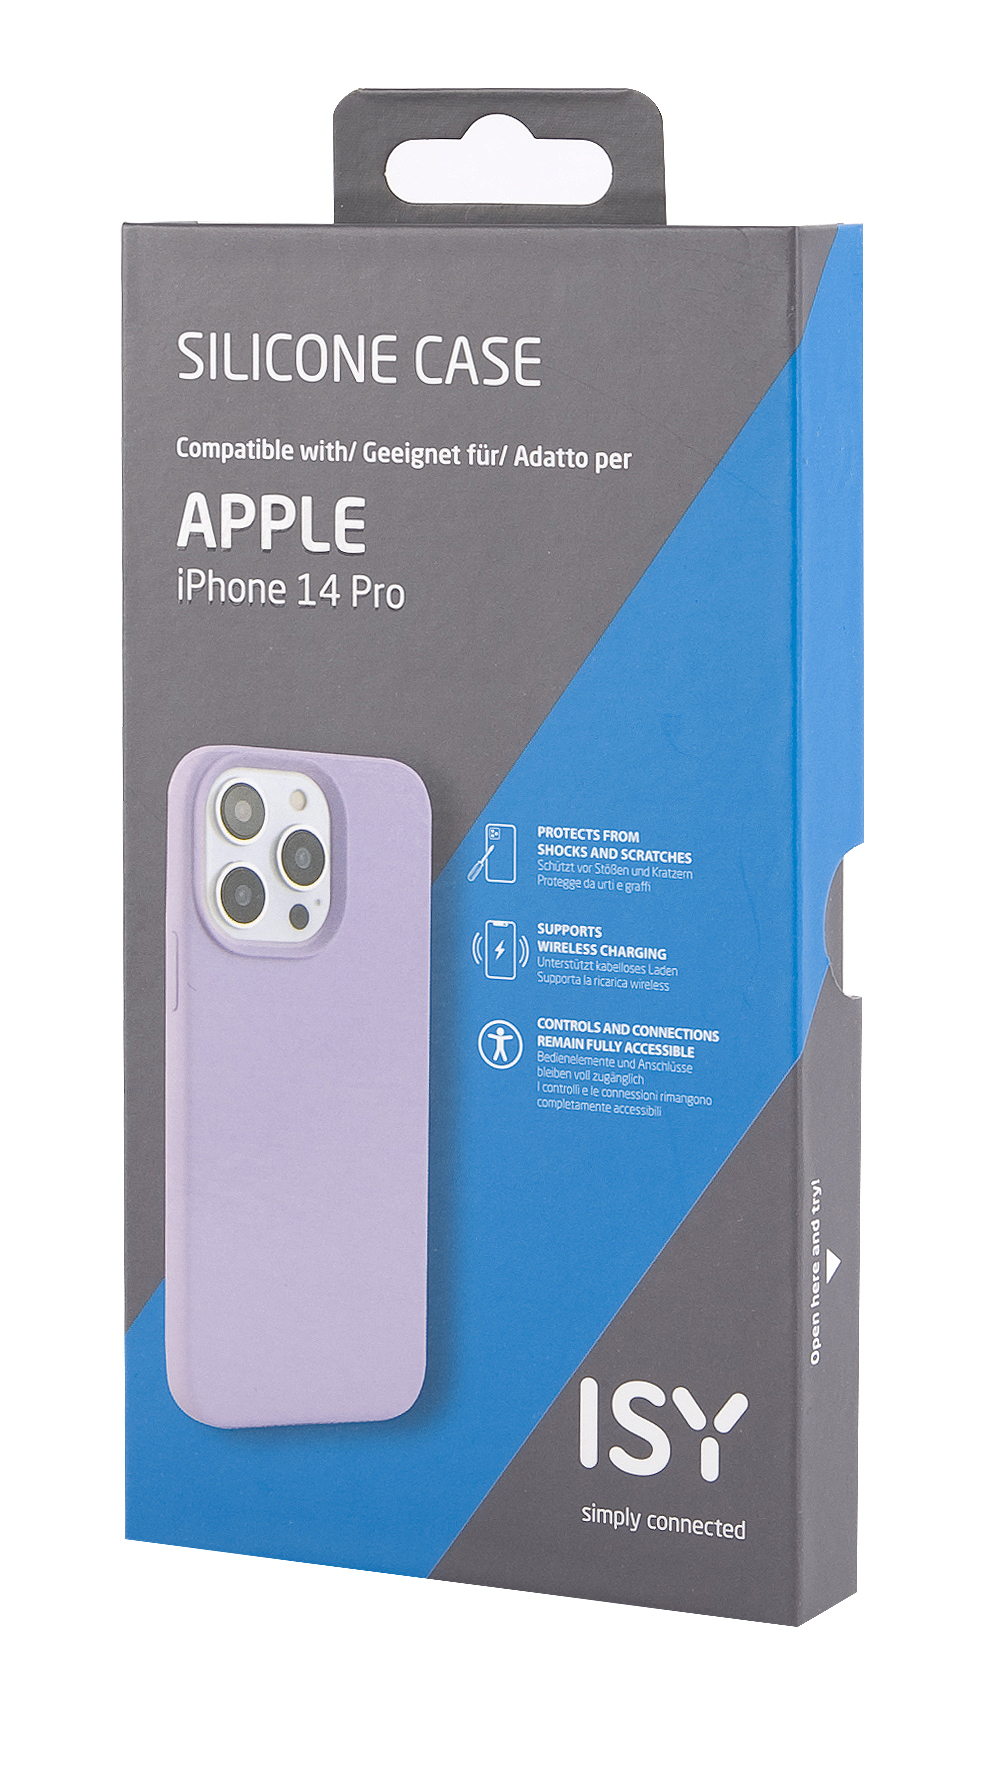 Violett 14 iPhone Apple, Backcover, ISC-2321, Pro, ISY